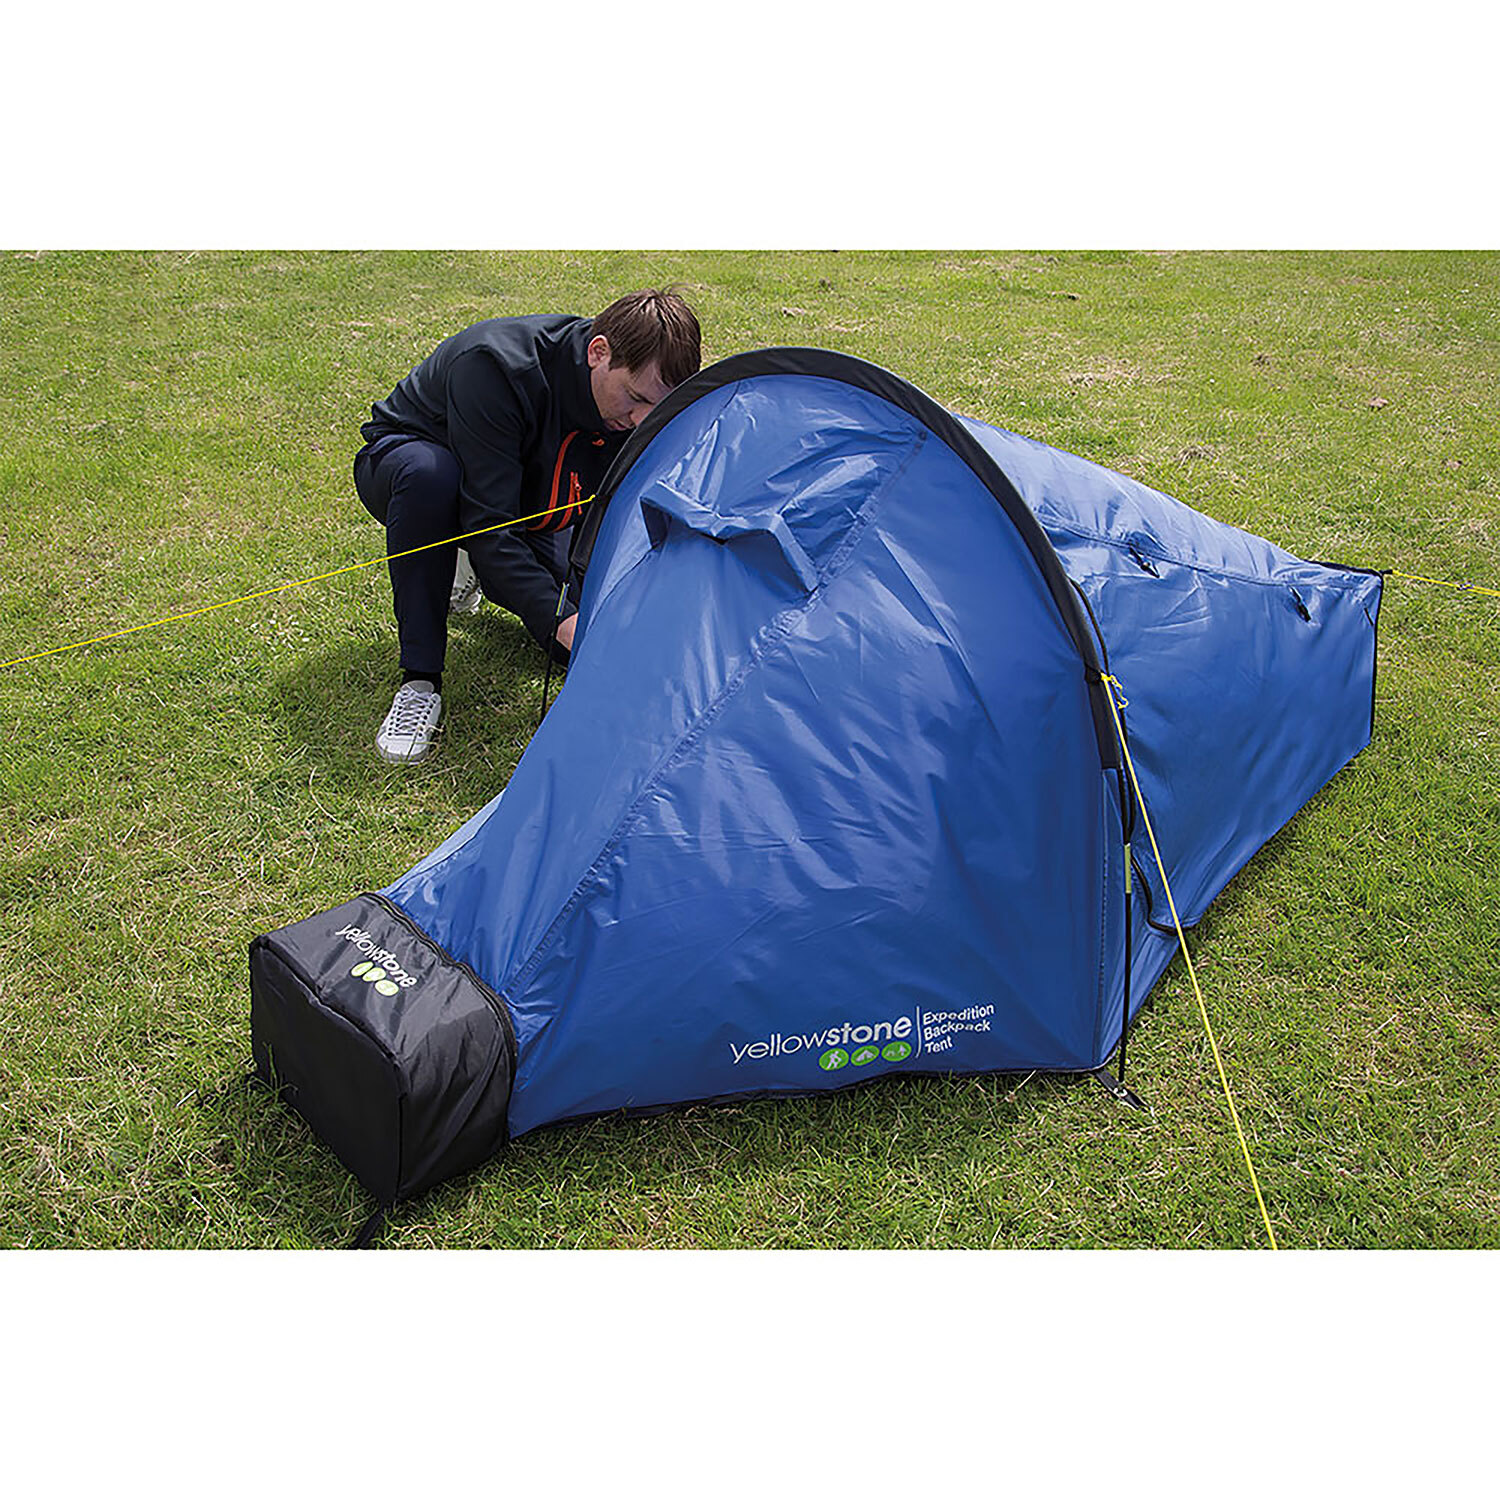 Yellowstone Expedition Backpack Tent Image 3